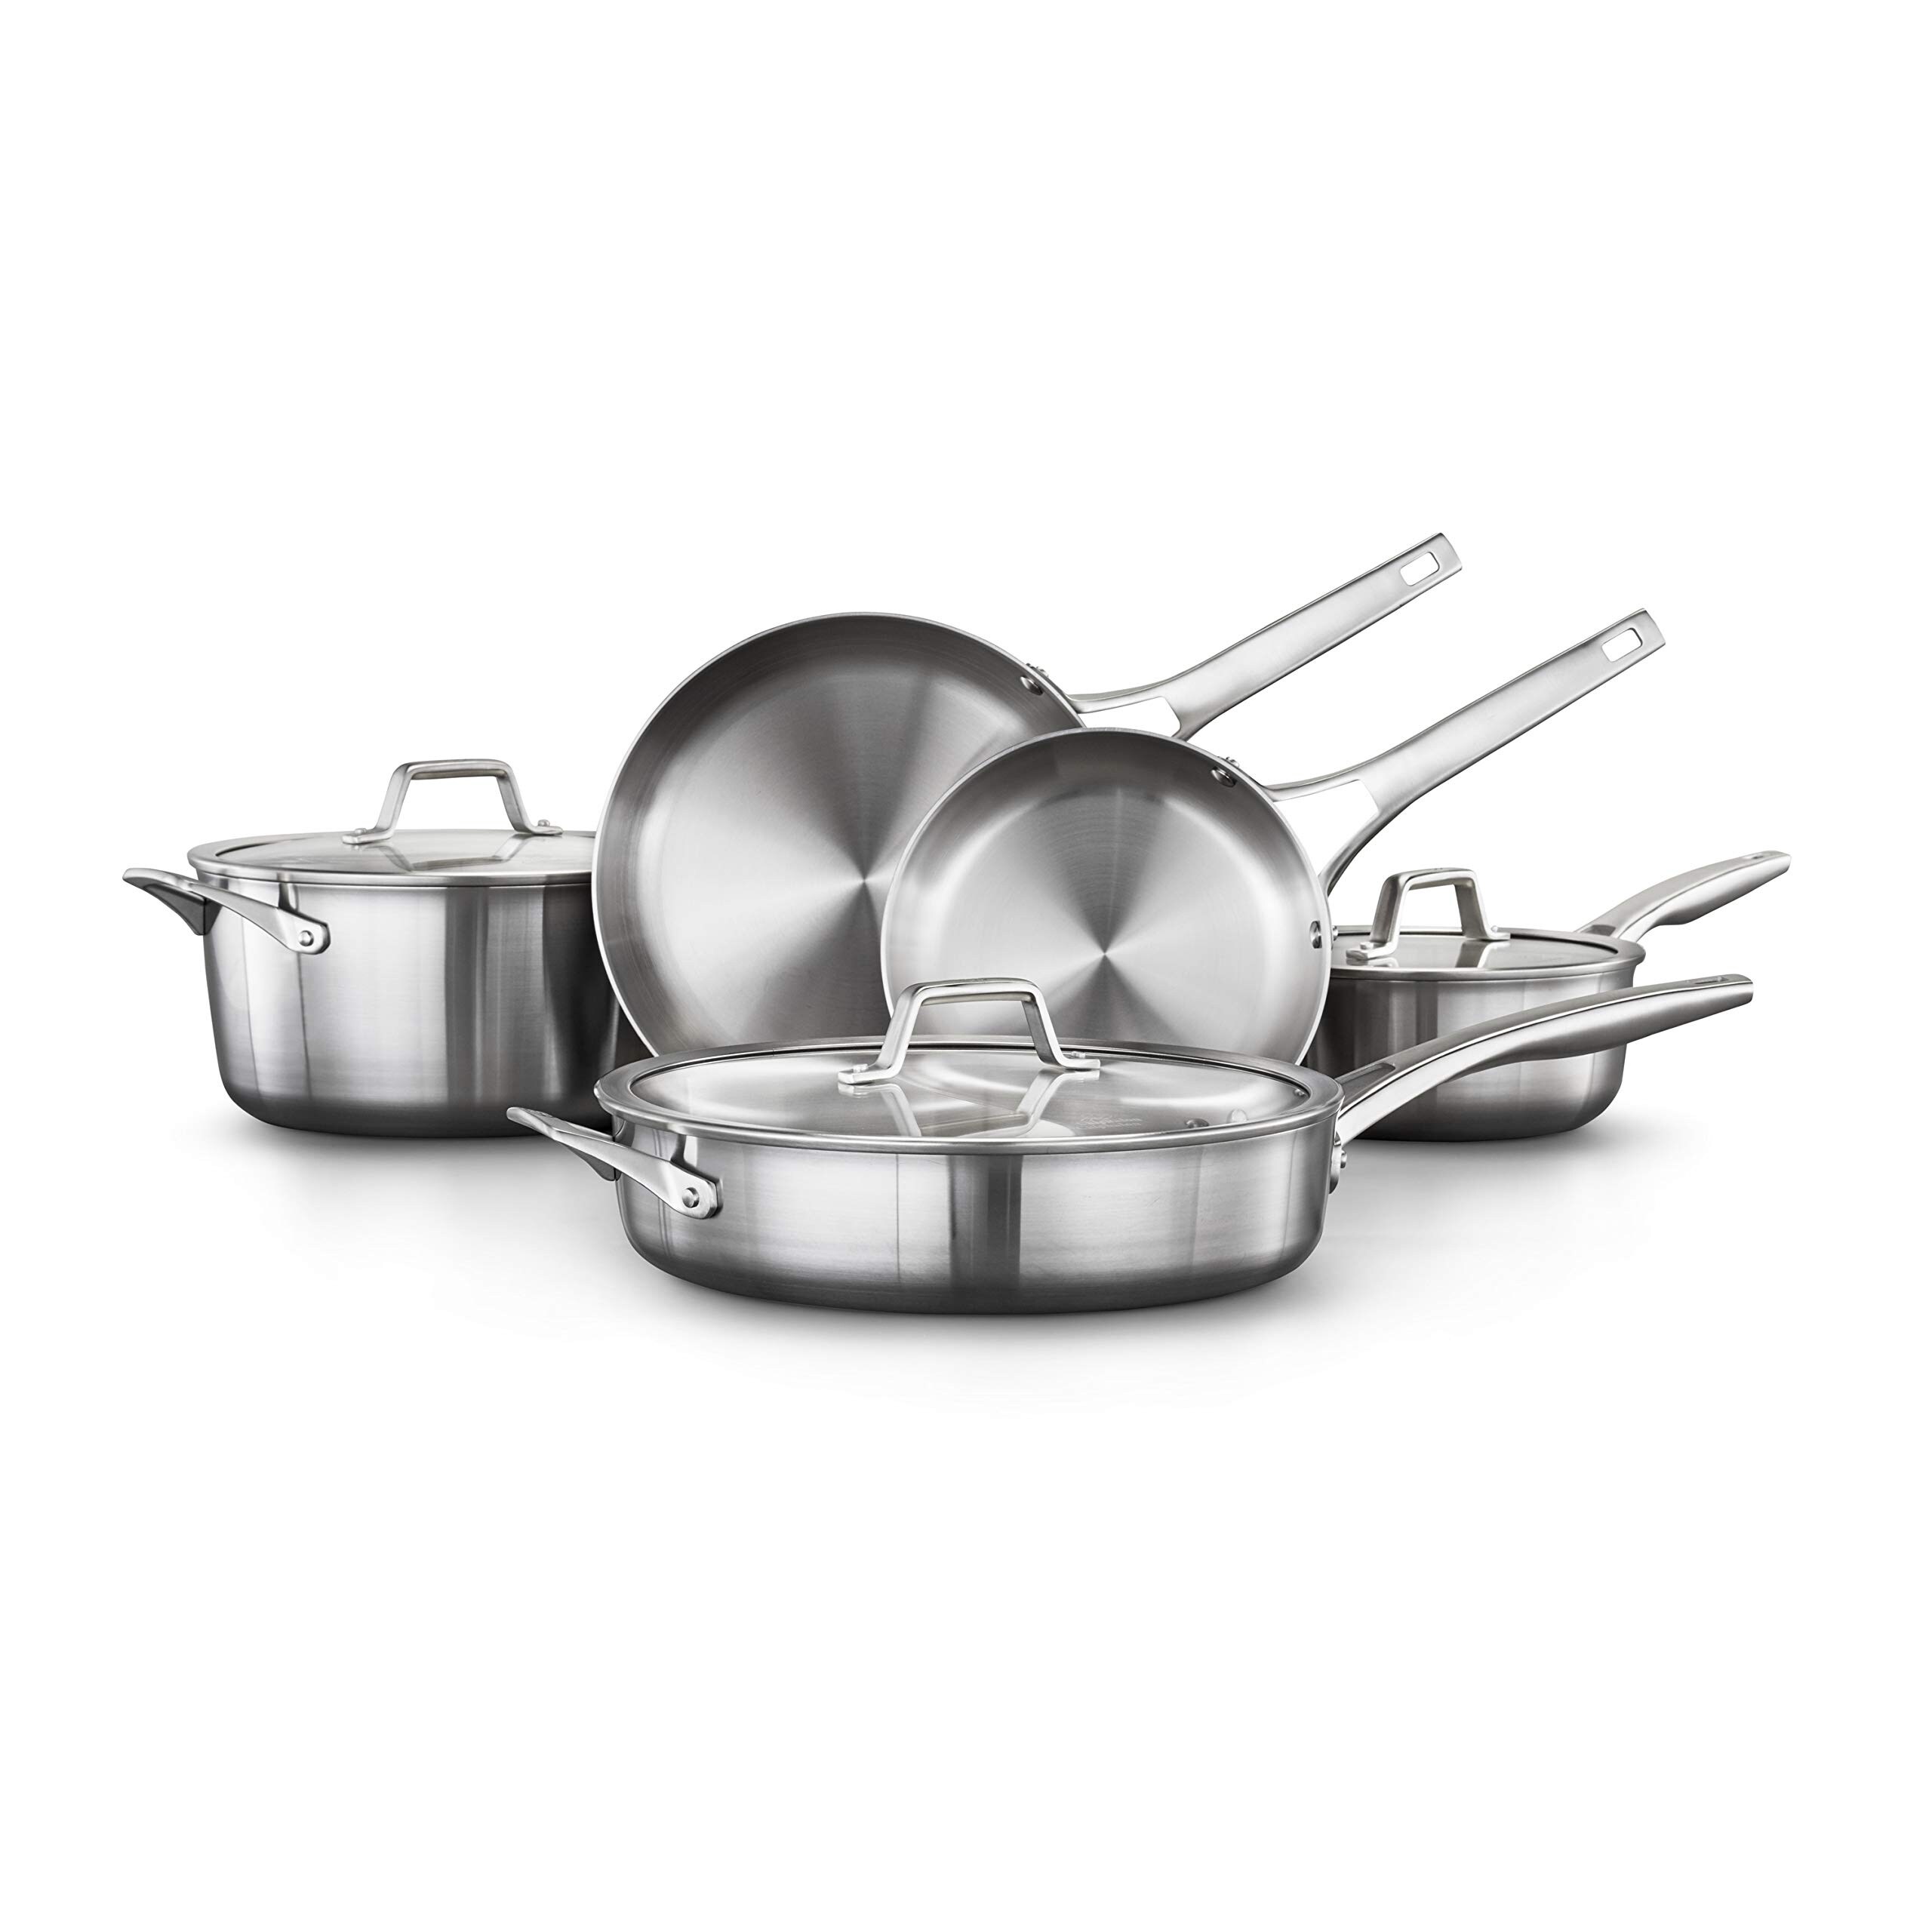 https://ak1.ostkcdn.com/images/products/is/images/direct/1fbc6a4ad90934caef7a3a6763f84816e61fe279/8-Piece-Pots-and-Pans-Set%2C-Stainless-Steel-Kitchen-Cookware-with-Stay-Cool-Handles%2C-Dishwasher-Safe%2C-Silver.jpg